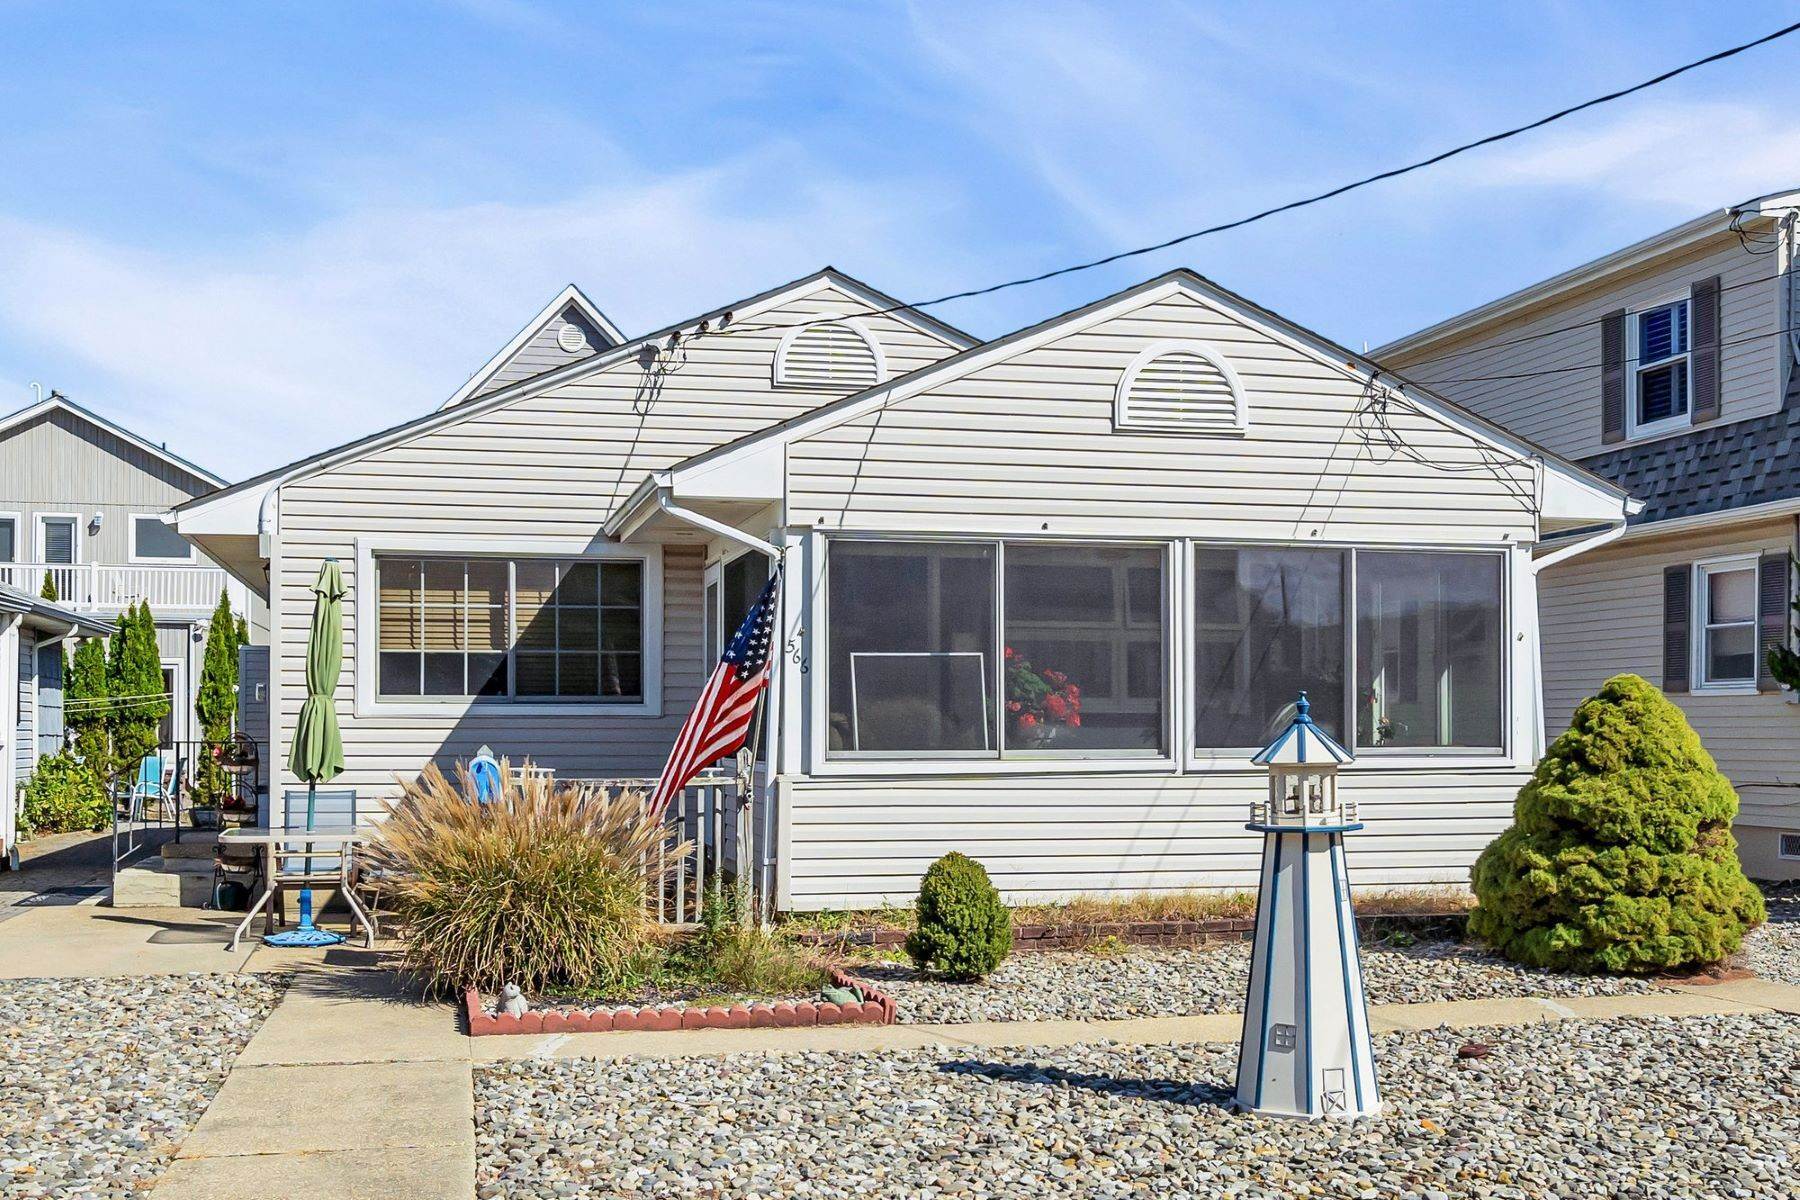 Single Family Homes for Sale at Excellent Location 566 Trout Avenue Manasquan, New Jersey 08736 United States